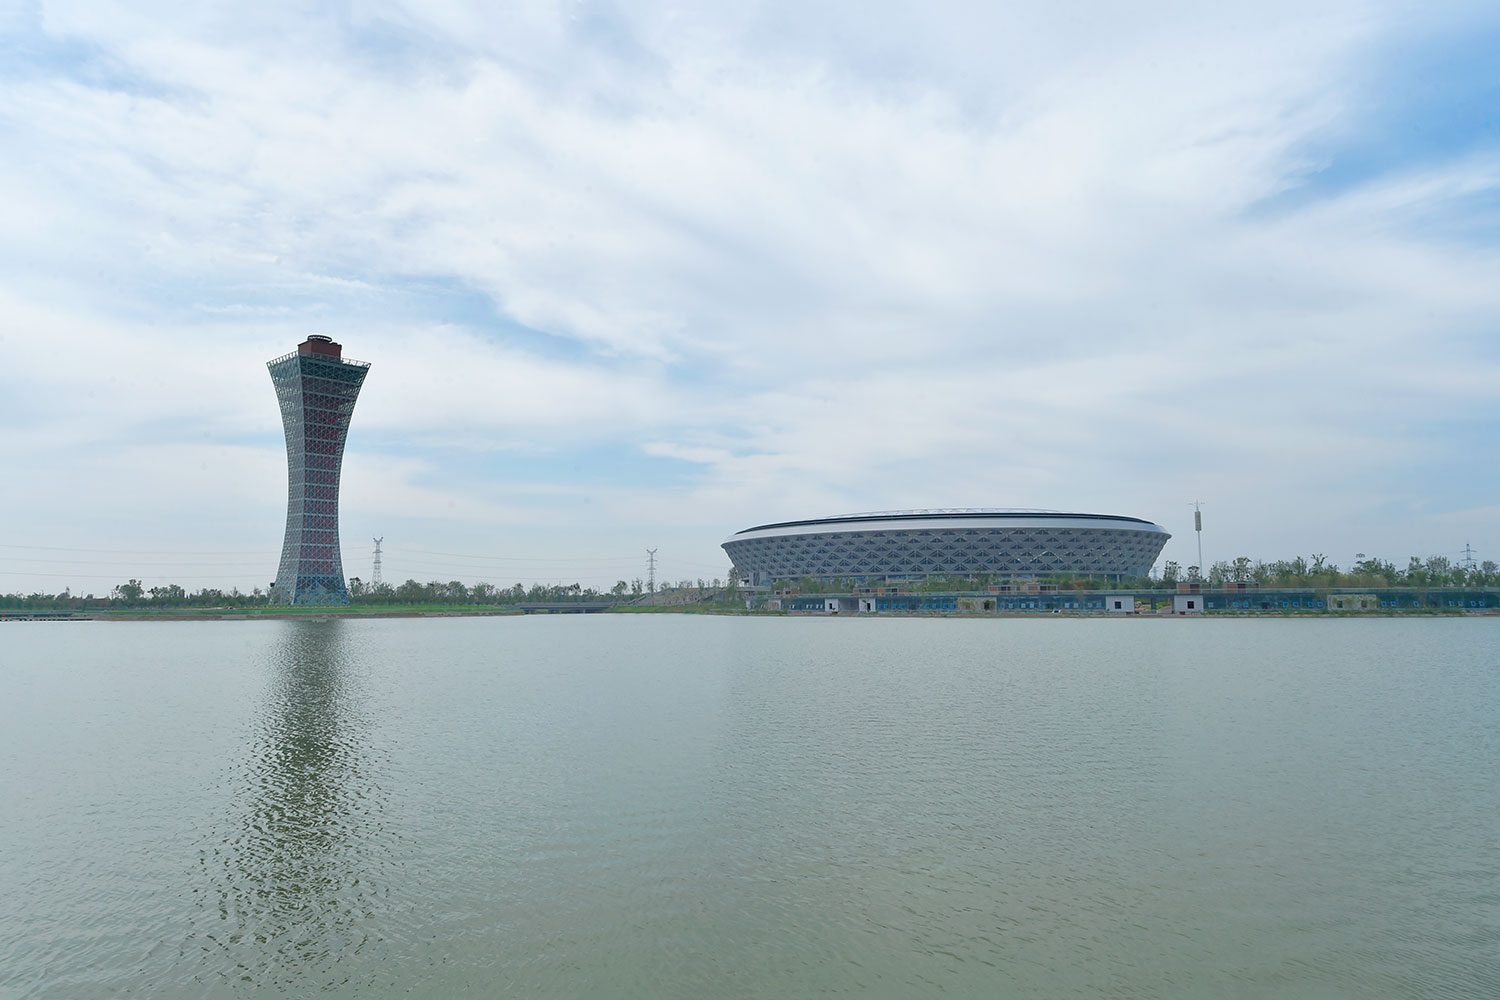 Xianyang Olympic Sports Center